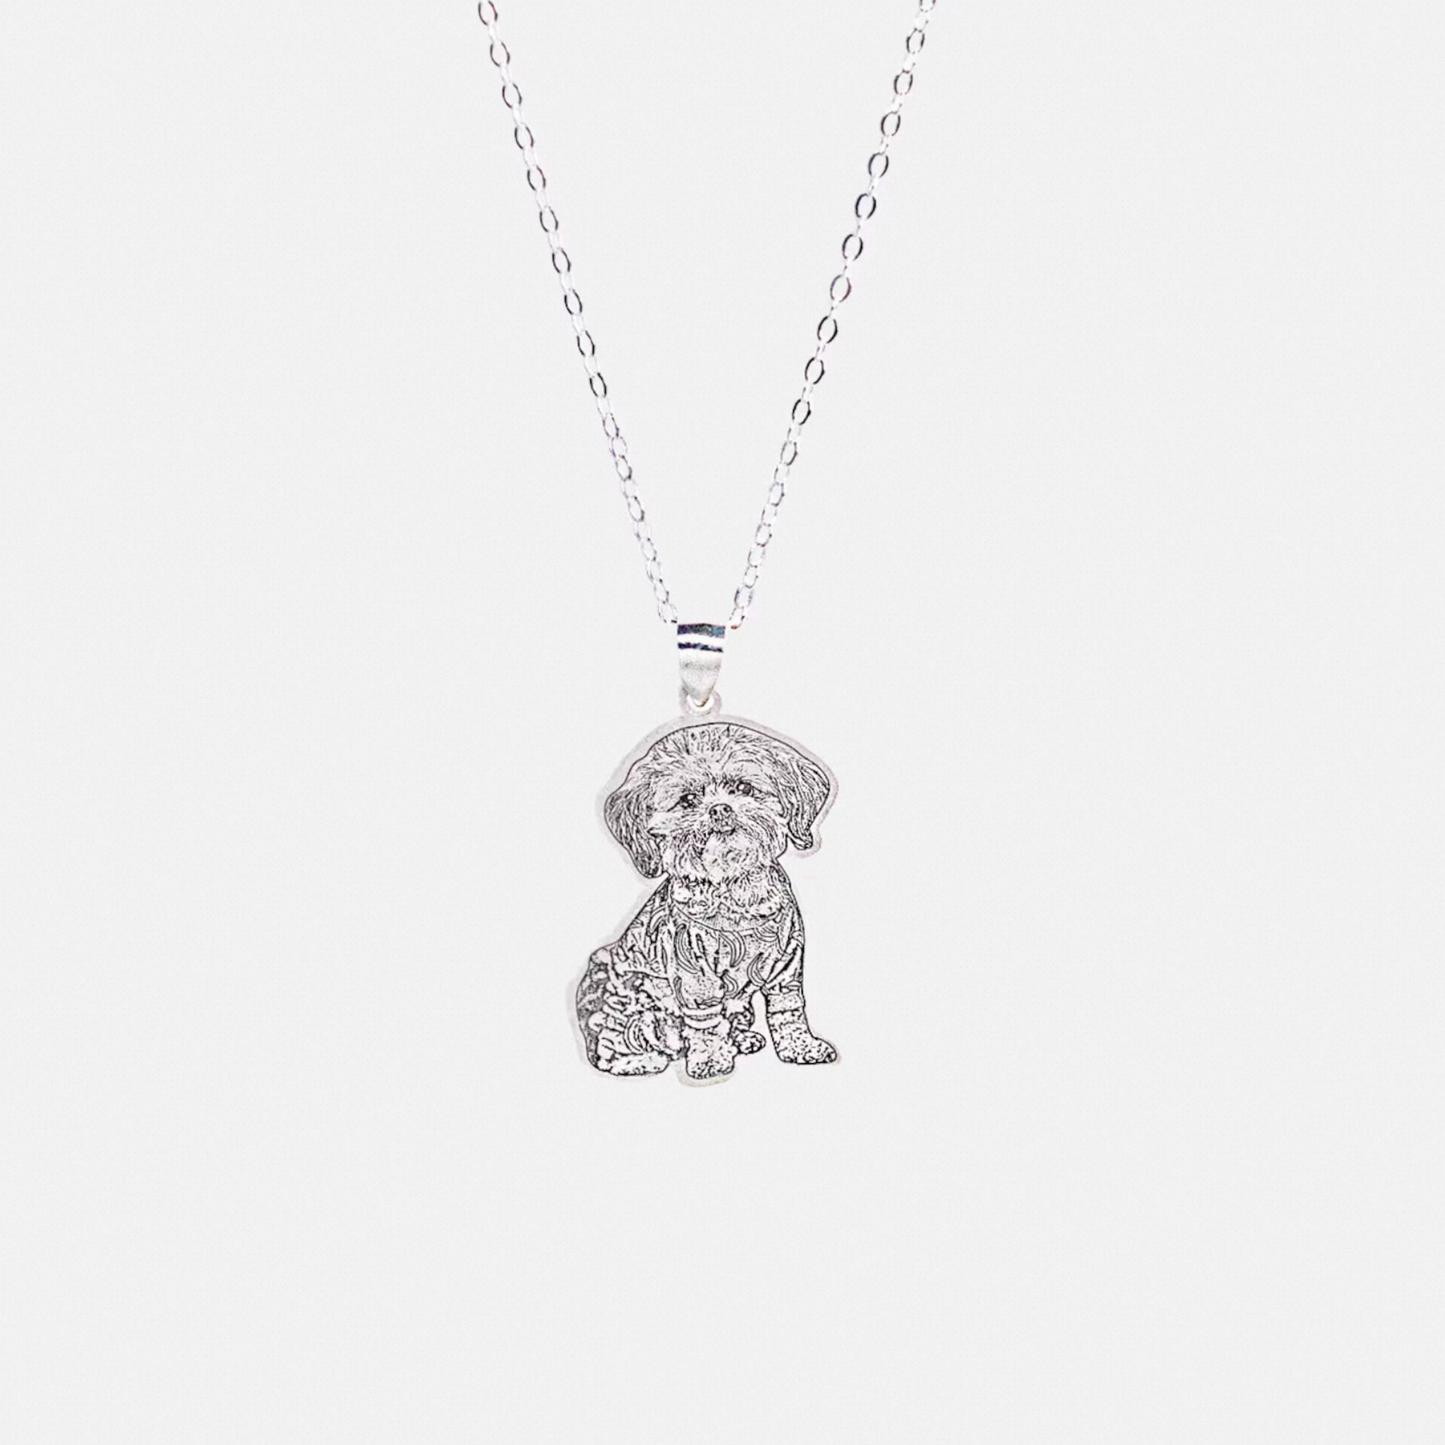 Custom Photo Engraved Necklace in 925 Sterling Silver | Customize With Your Lovely Pet | Custom Pet Necklace | Best Mother's Day Gift